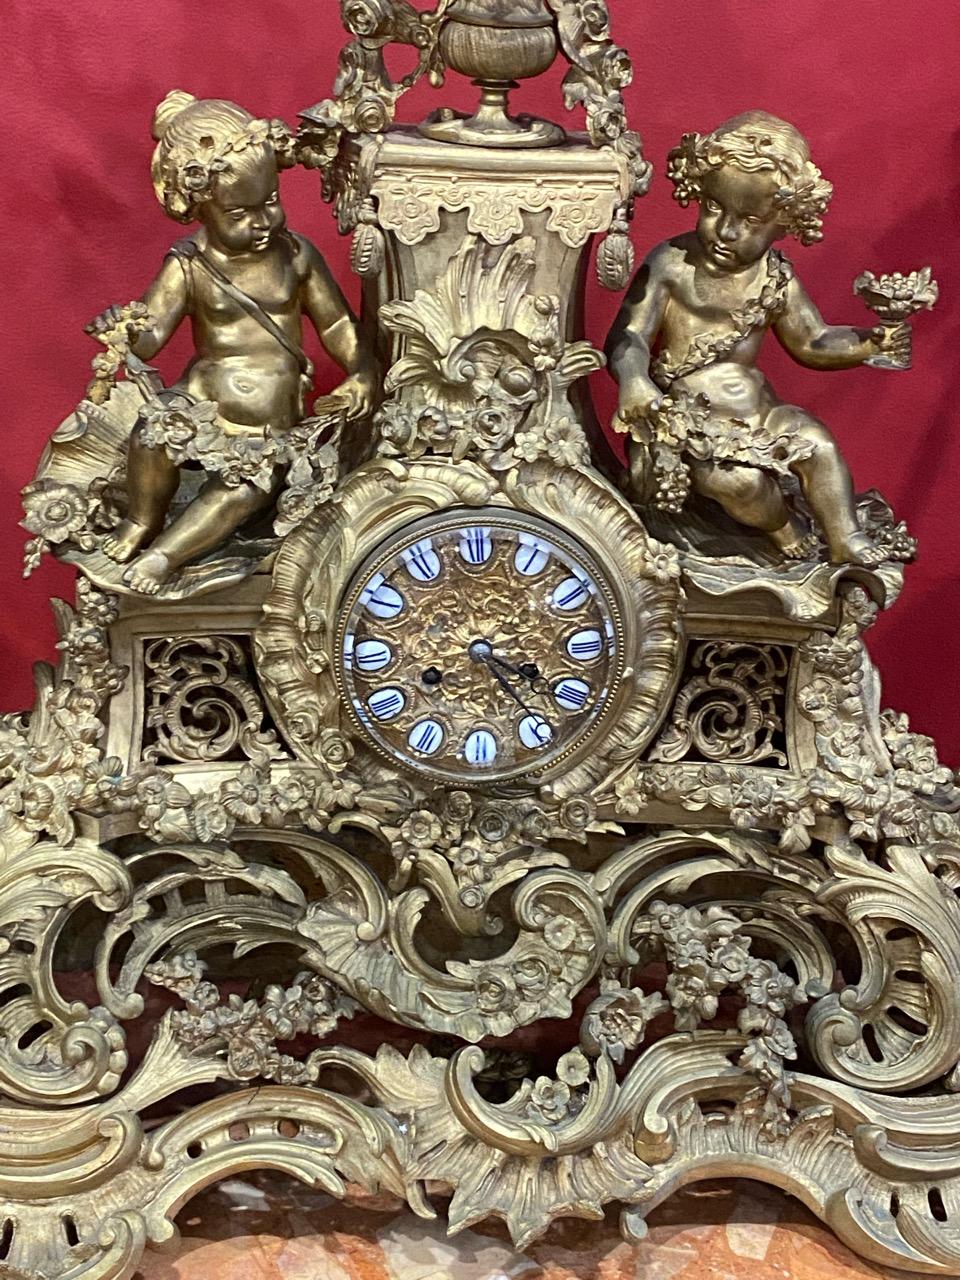 Majestic 19th Century French Gilt Bronze Candelabras and Clock Garniture For Sale 6